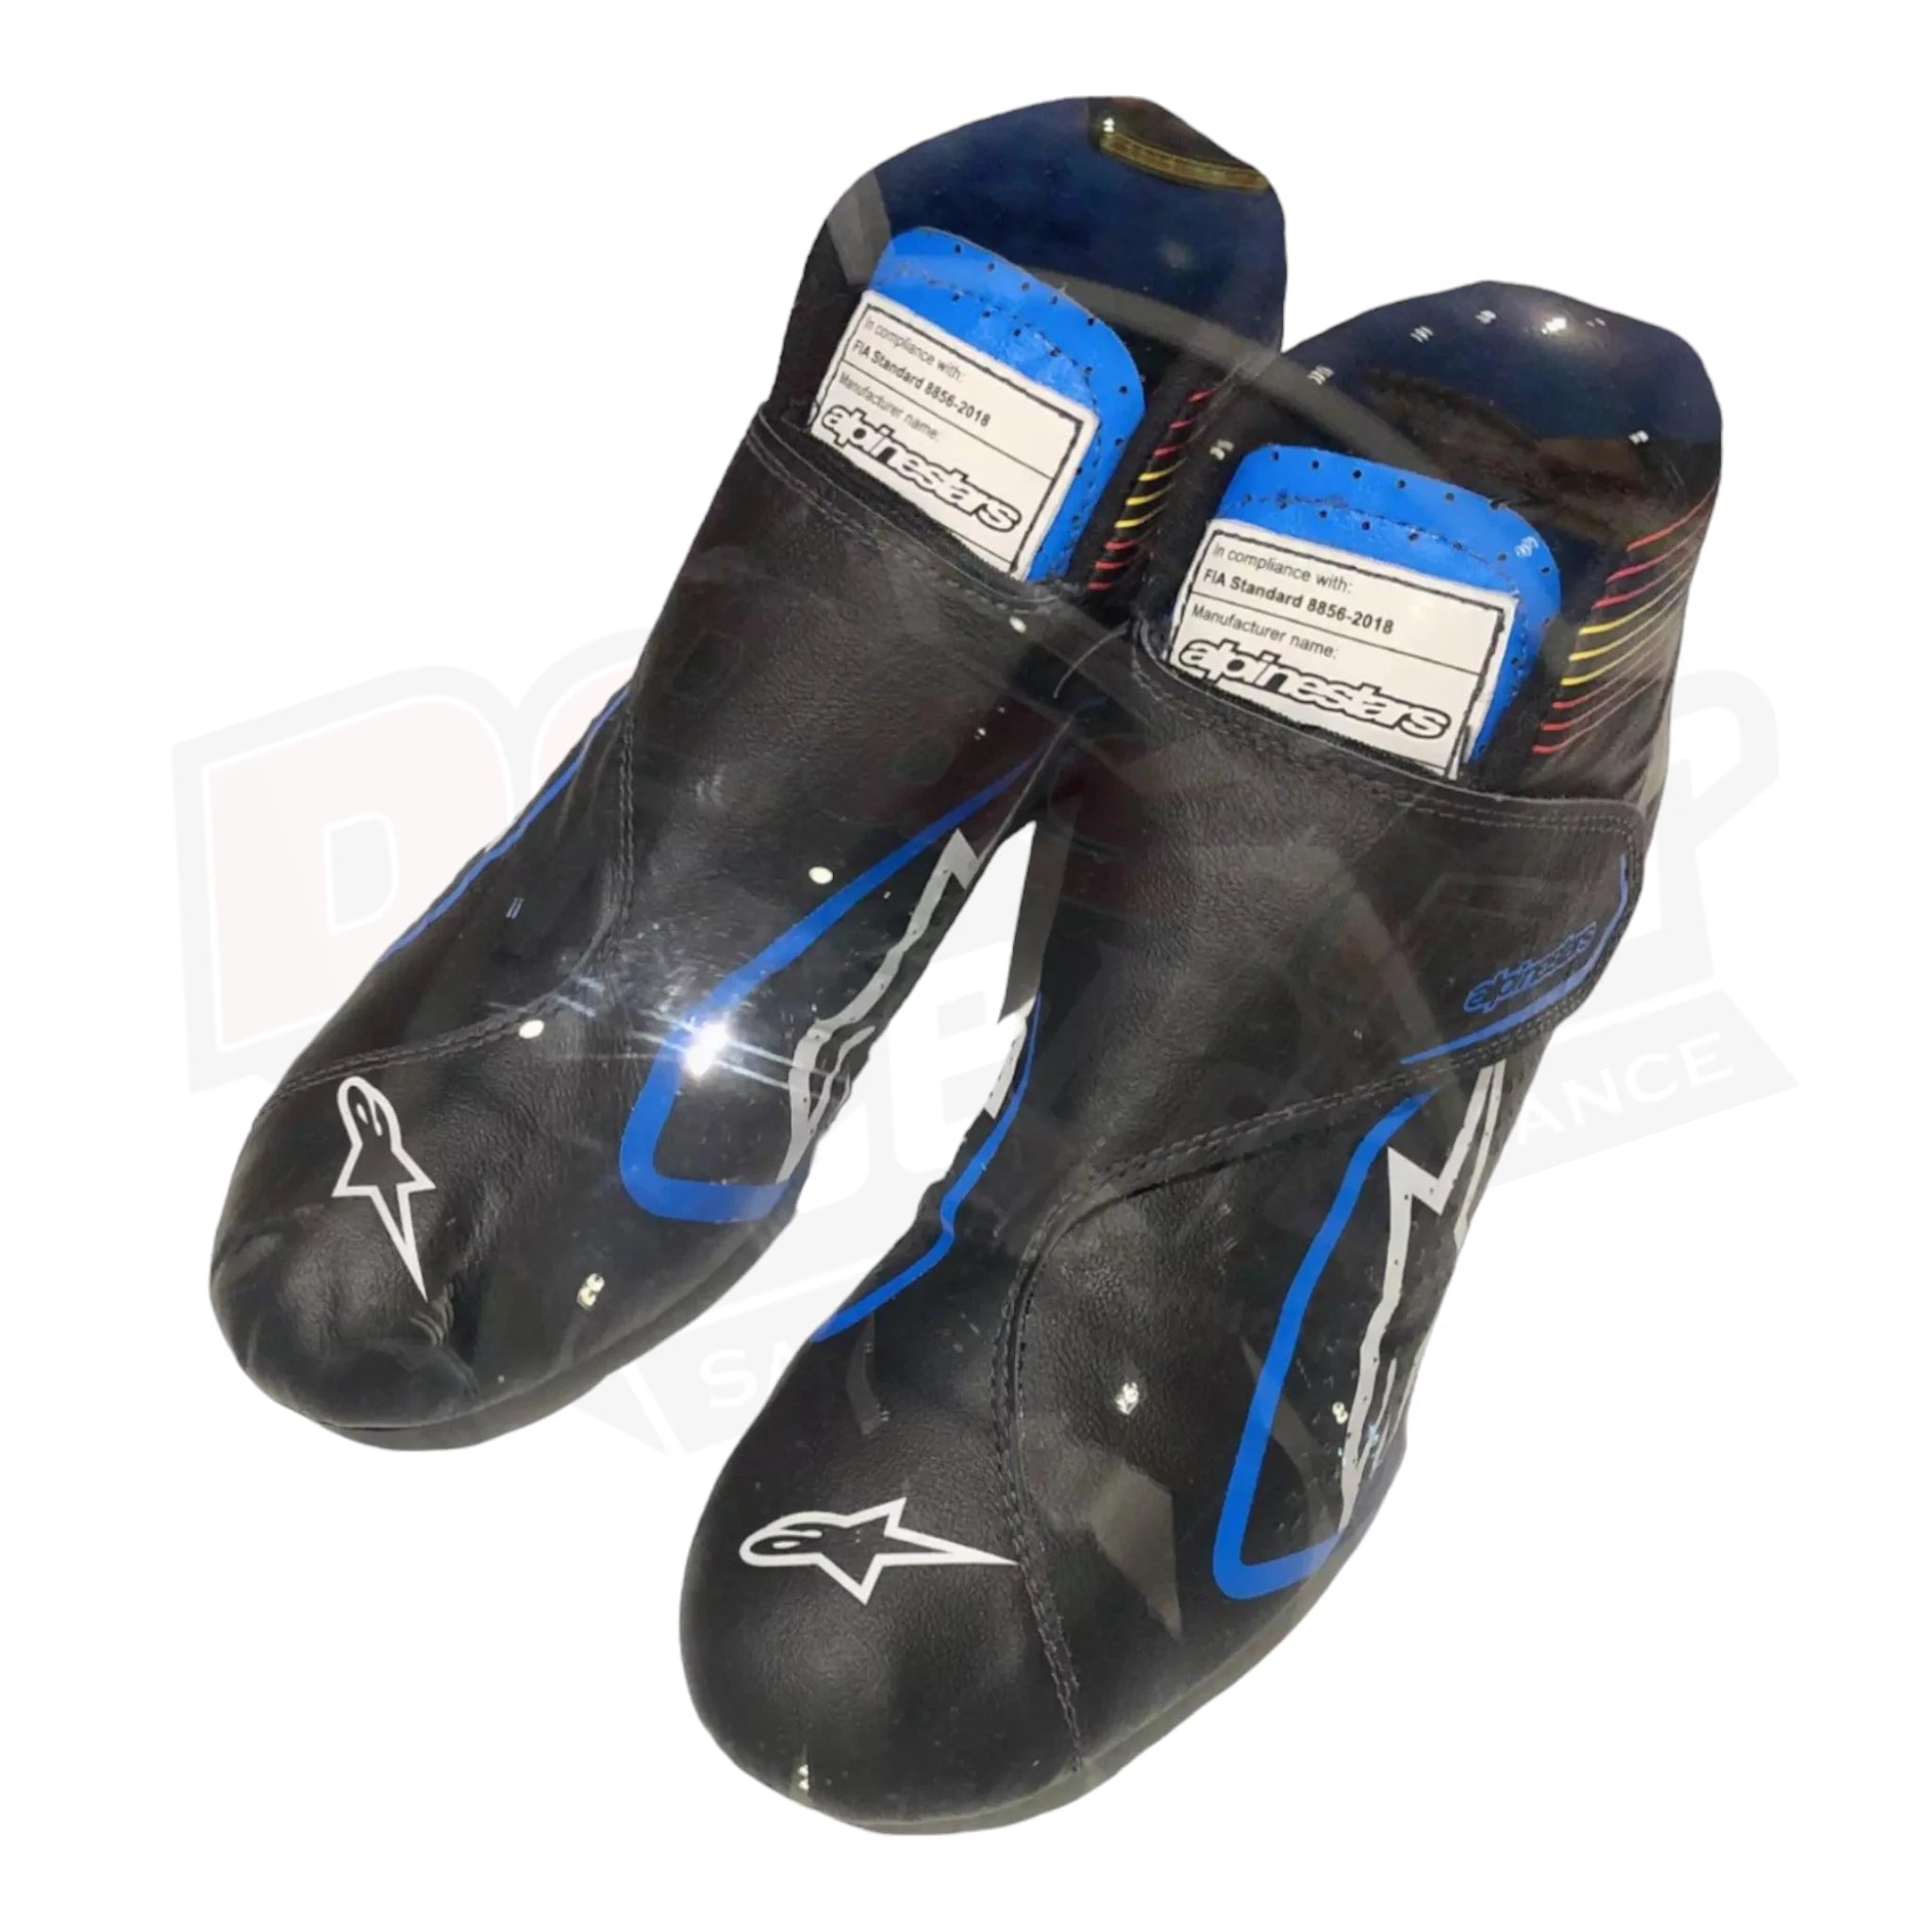 2019 GEORGE RUSSELL Williams Racing F1 Race Boots